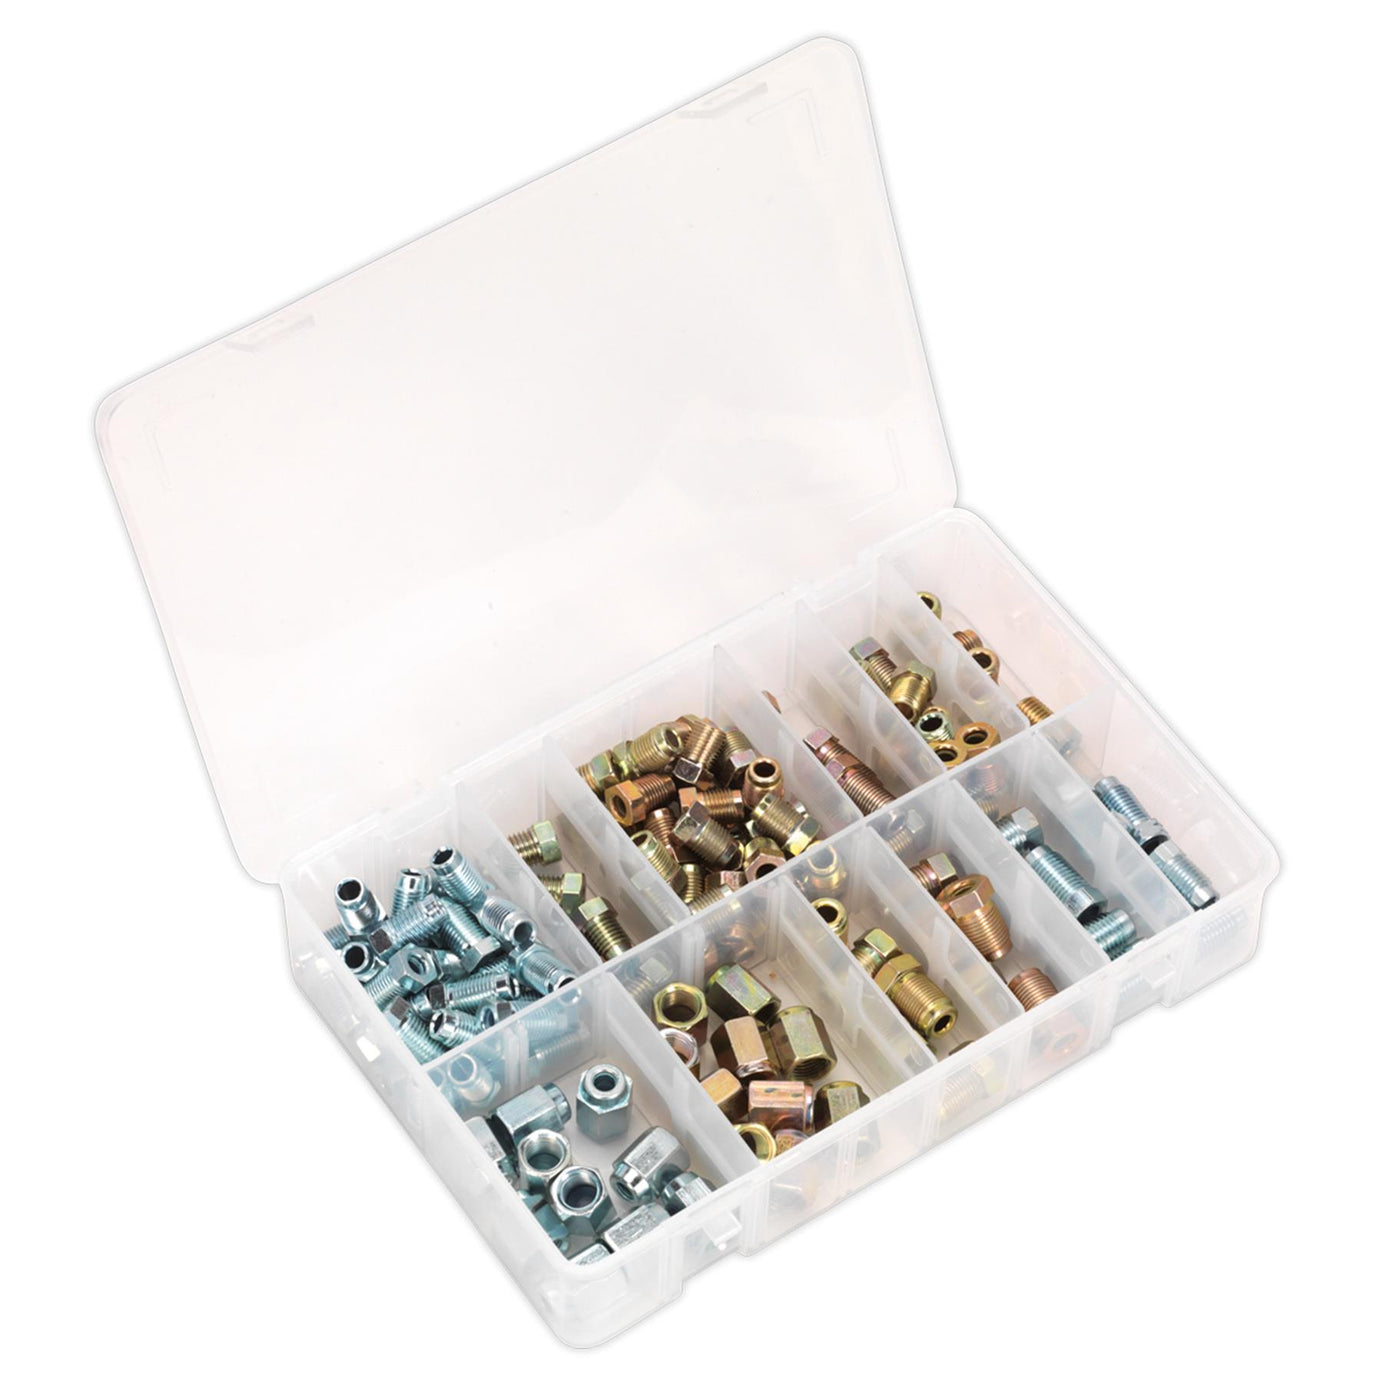 Sealey High Quality Brake Pipe Nuts Assortment 200pc - Metric & Imperial